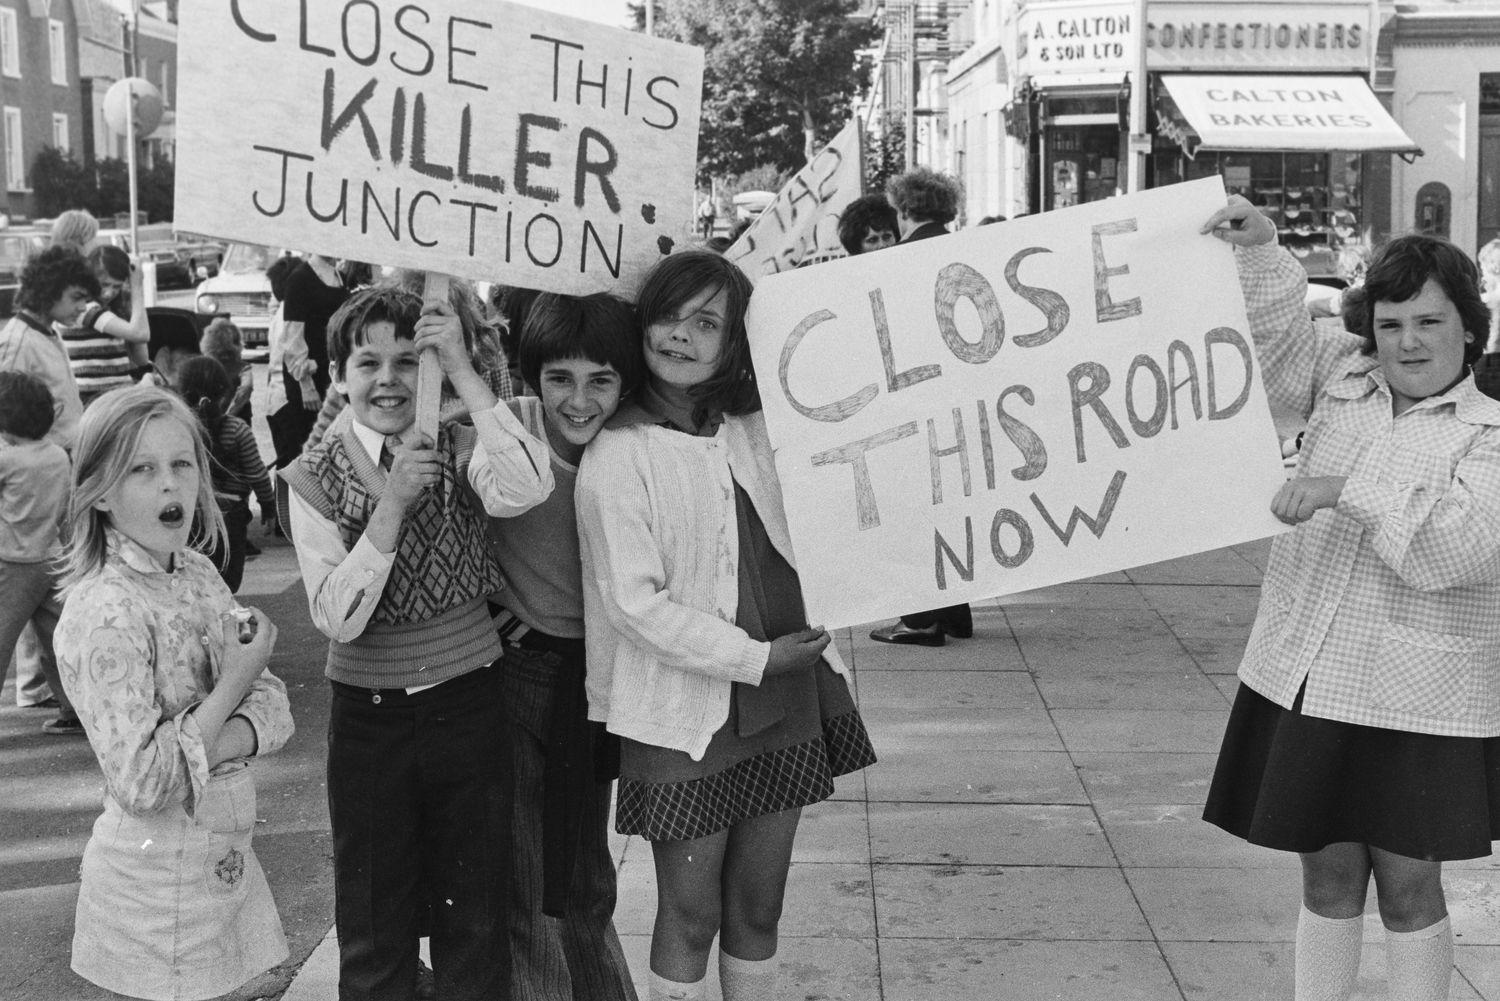 Hackney - A photographic journey from the 1970s to 2020s  | Hackney Museum